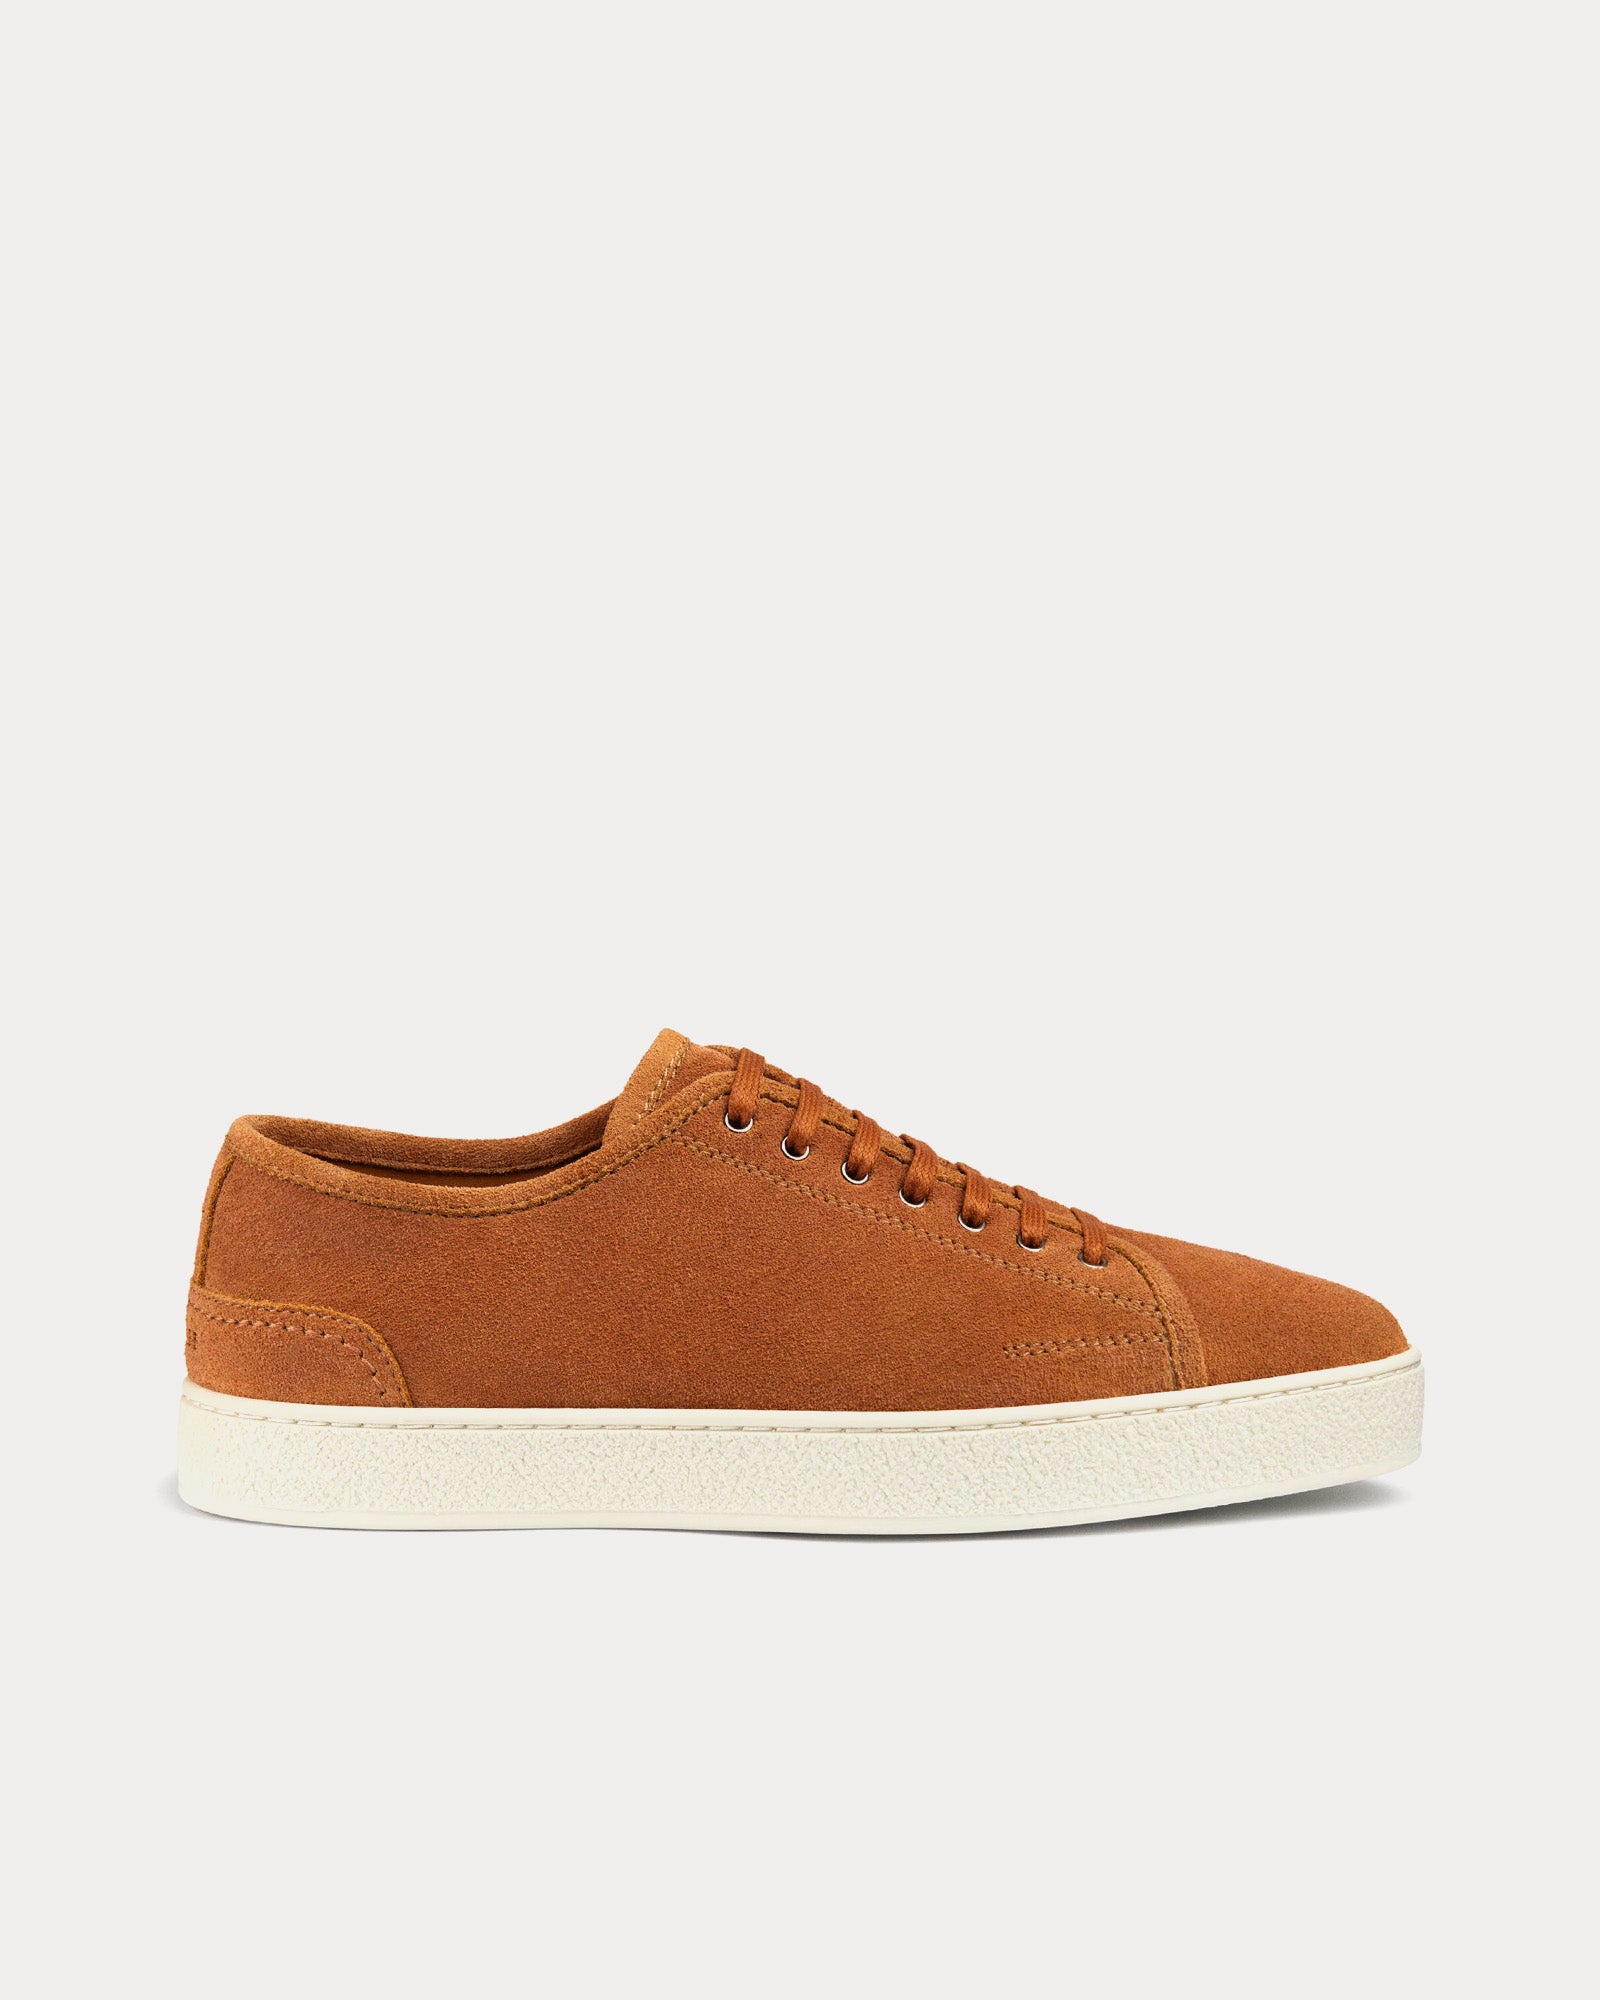 John Lobb - Stockwell Suede Cider Low Top Sneakers